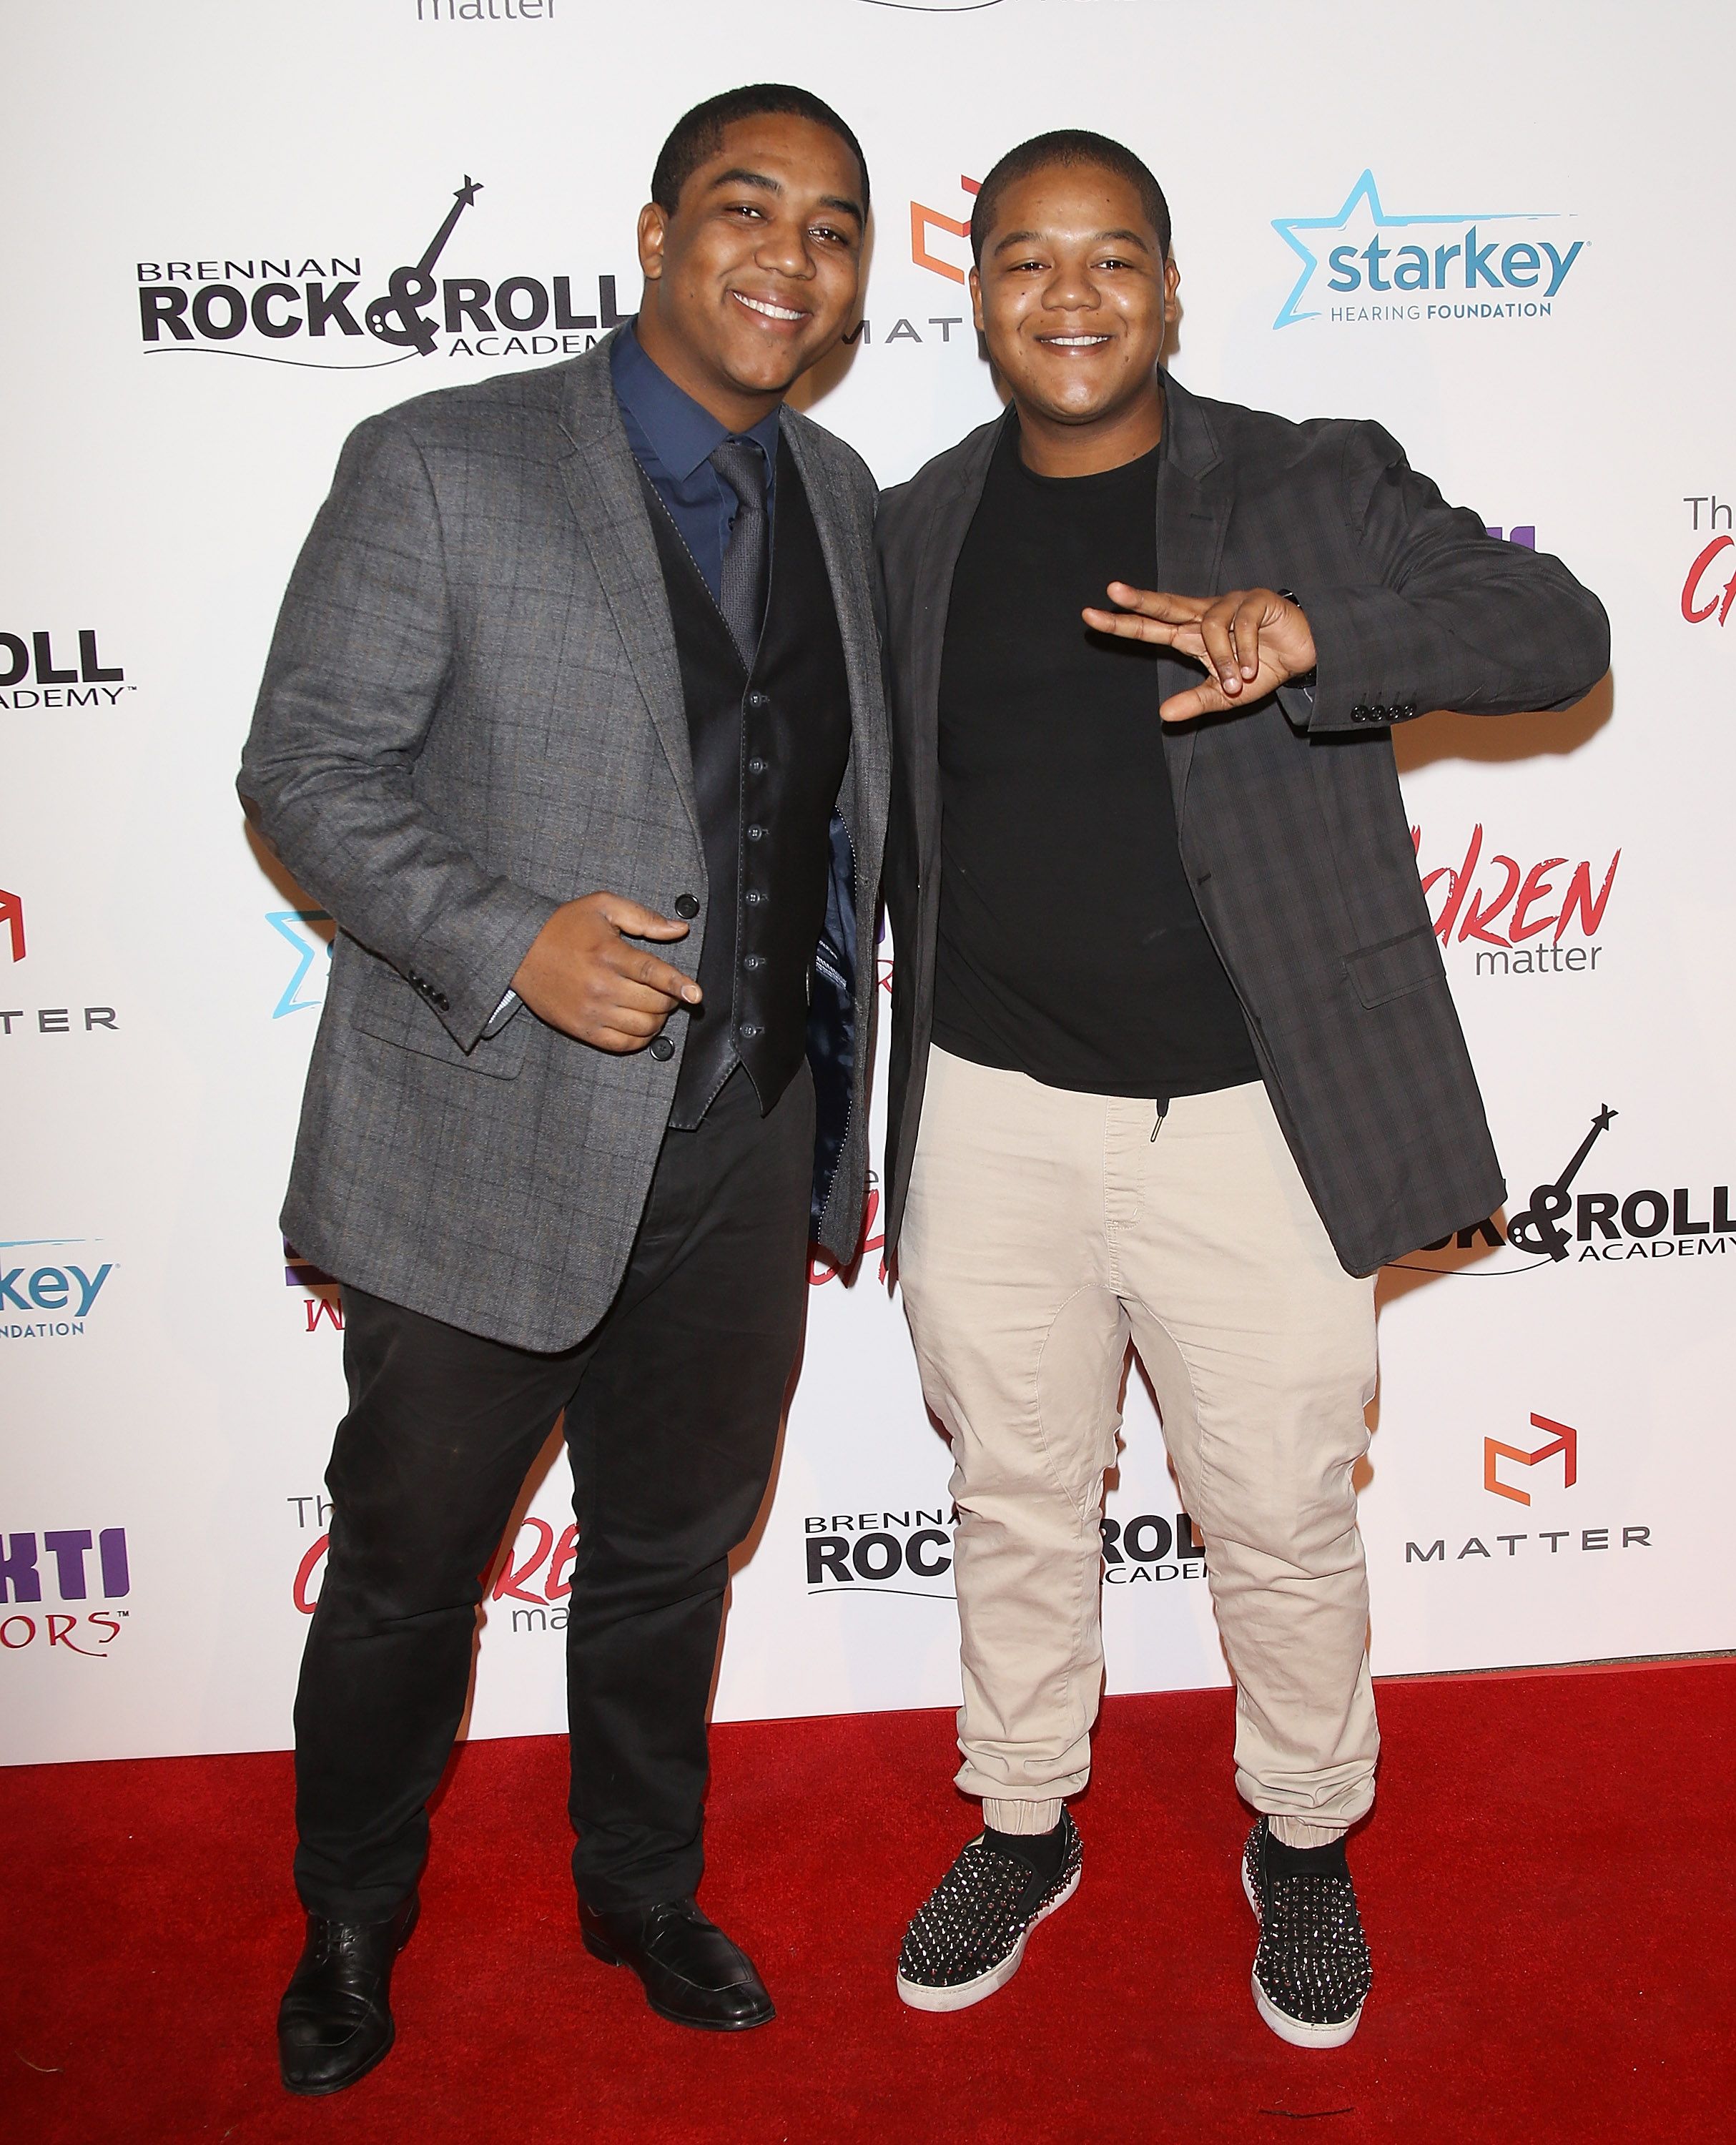 Christopher Massey and Kyle Massey arrive at The Children Matter.NGO 1st Annual Gala held on November 7, 2015 in Beverly Hills, California. | Source: Getty Images